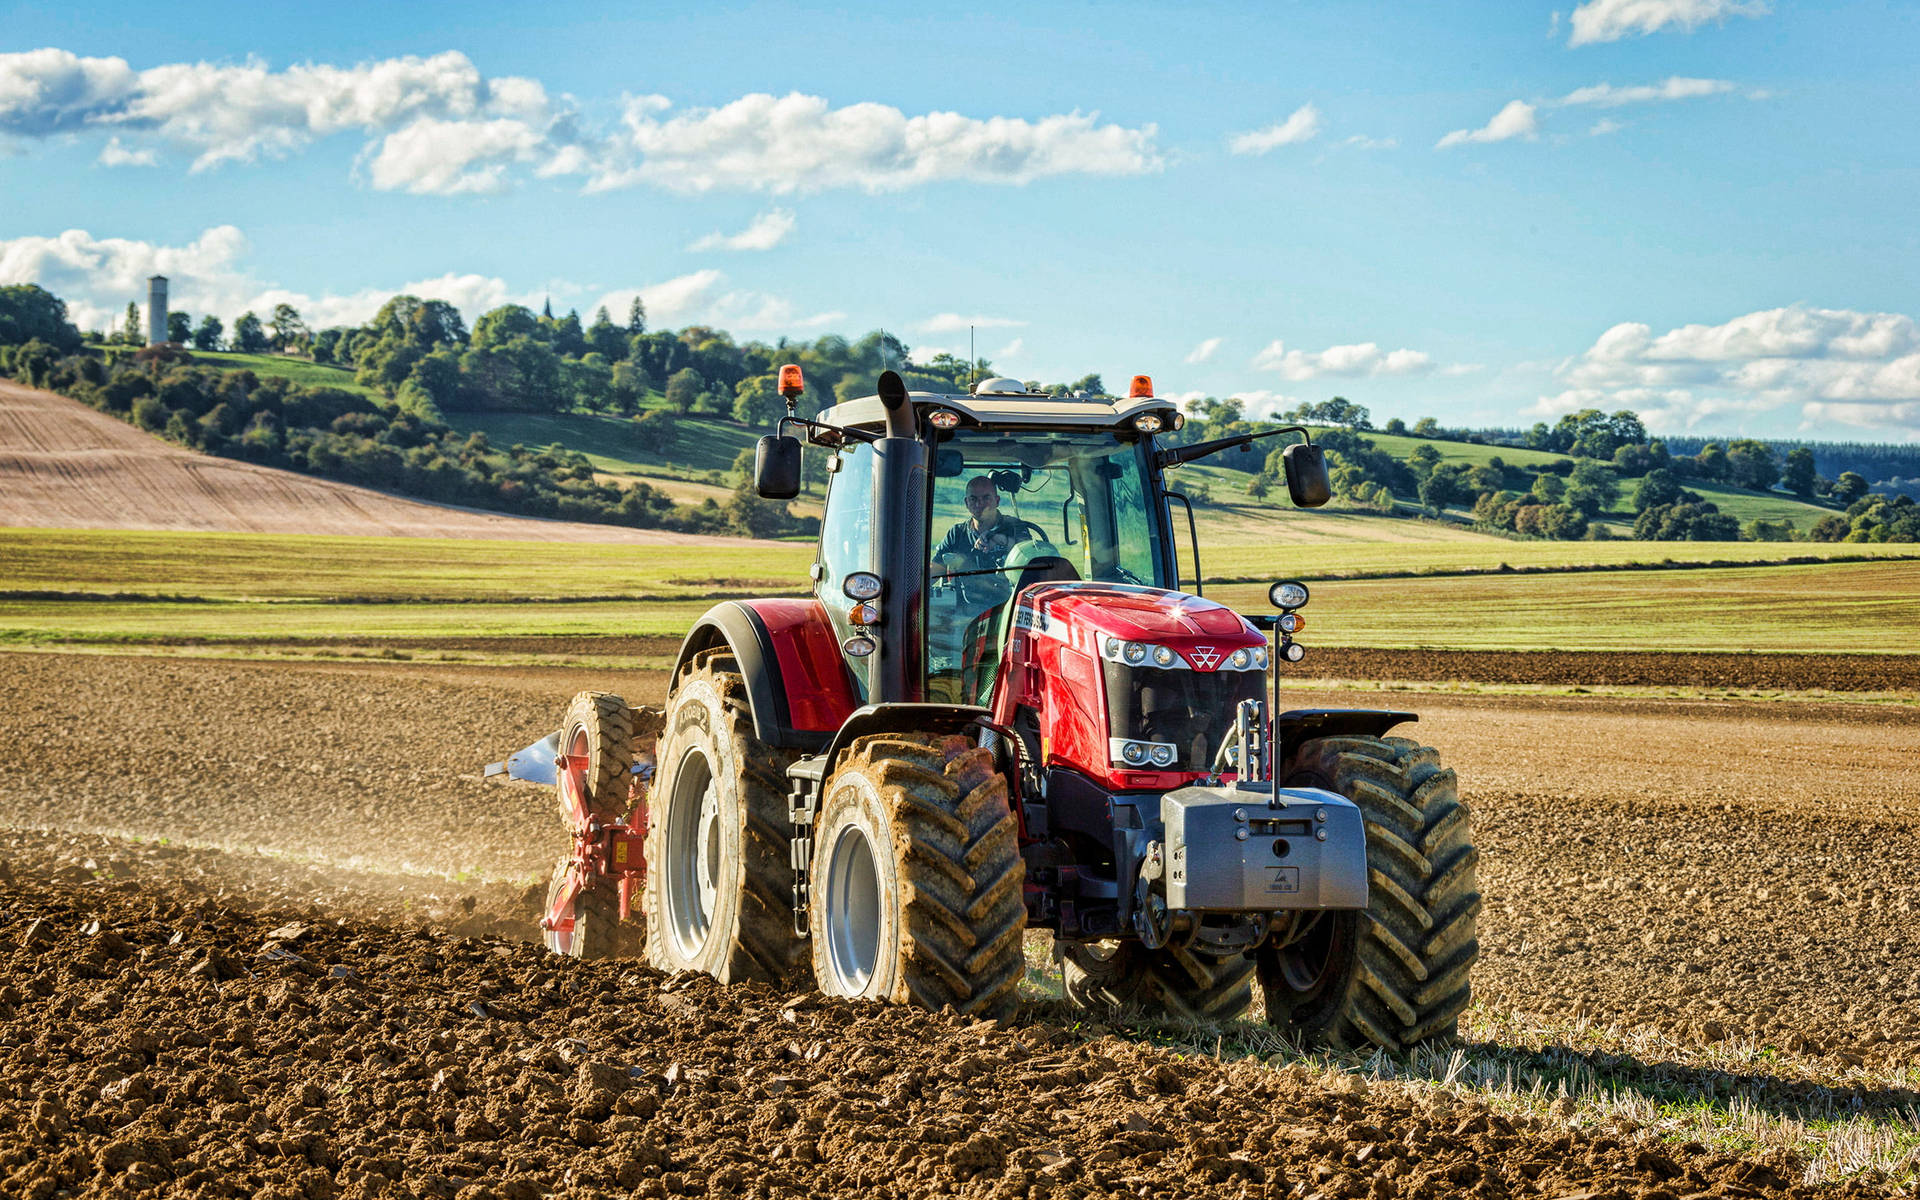 Download Tractor wallpapers for mobile phone free Tractor HD pictures